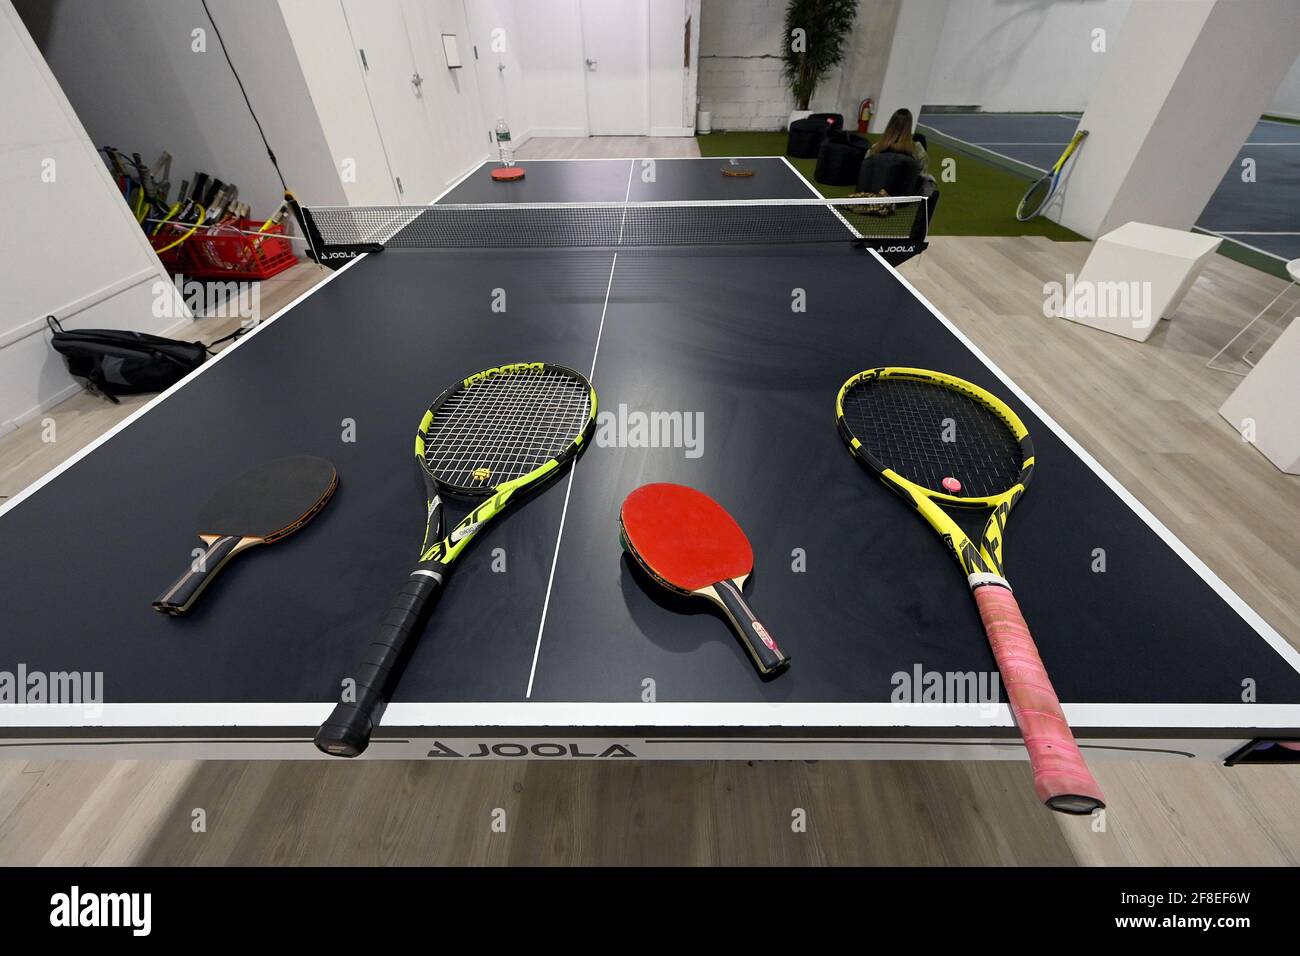 Ping pong paddles and tennis rackets Aree set on a table awaiting kids play time at the Tennis Innovator courts located on 8th Avenue in Midtown Manhattan, New York, NY, April 13, 2021. Equipped with an ION/UV virus killing air ventilation system, the 8,000 square-foot facility offers 4 modified tennis courts with available tennis lessons for adults and children; an “Innovators Move!” program offers time for children to play multiple types of ball games, including basketball, table tennis and tennis, centered around developing strength and coordination. (Photo by Anthony Behar/Sipa USA) Stock Photo